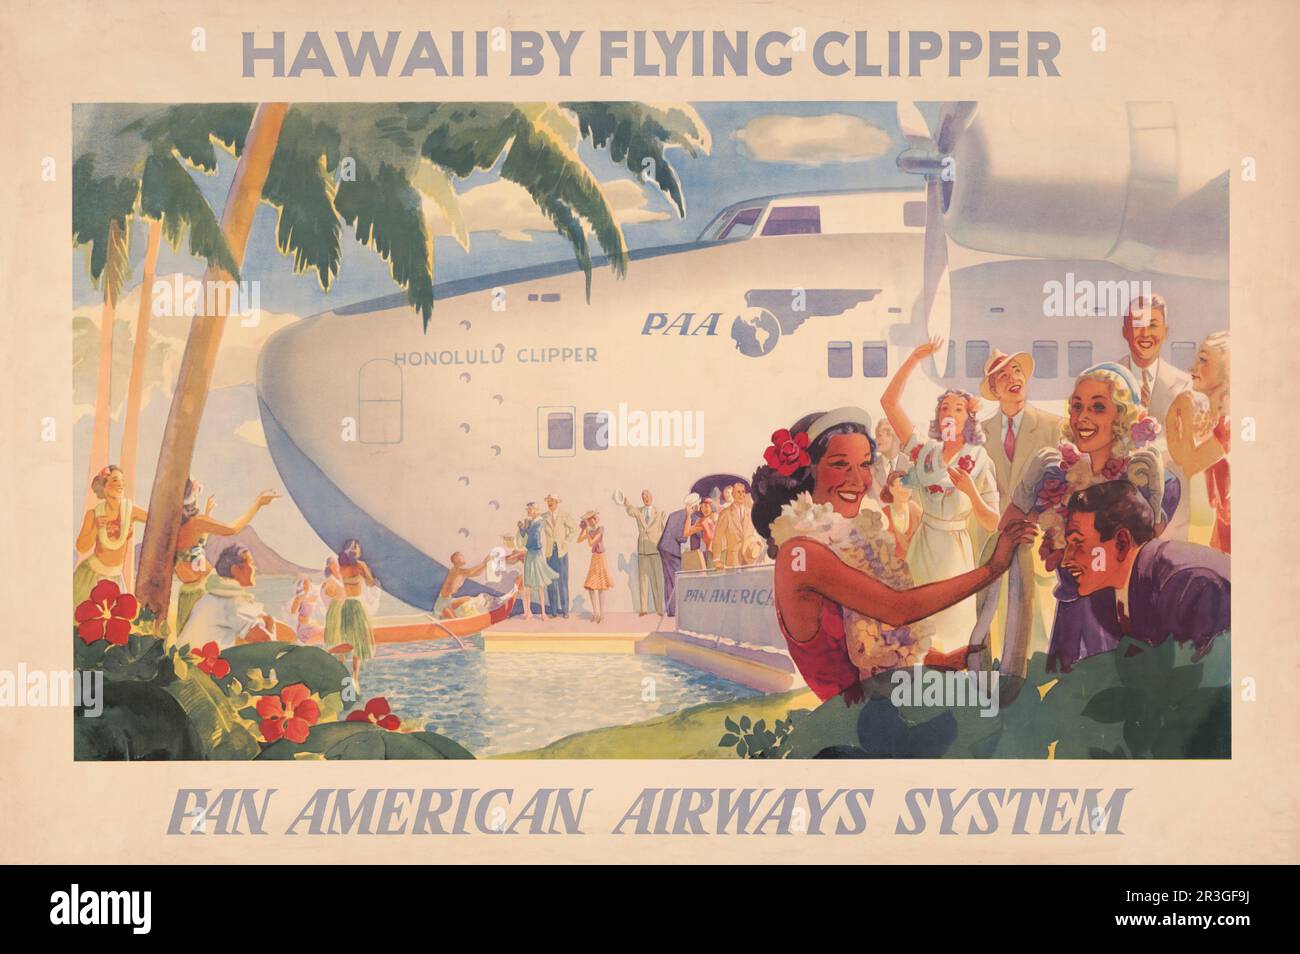 Hawaii by flying clipper, Pan American Airways System, circa 1938. Stock Photo